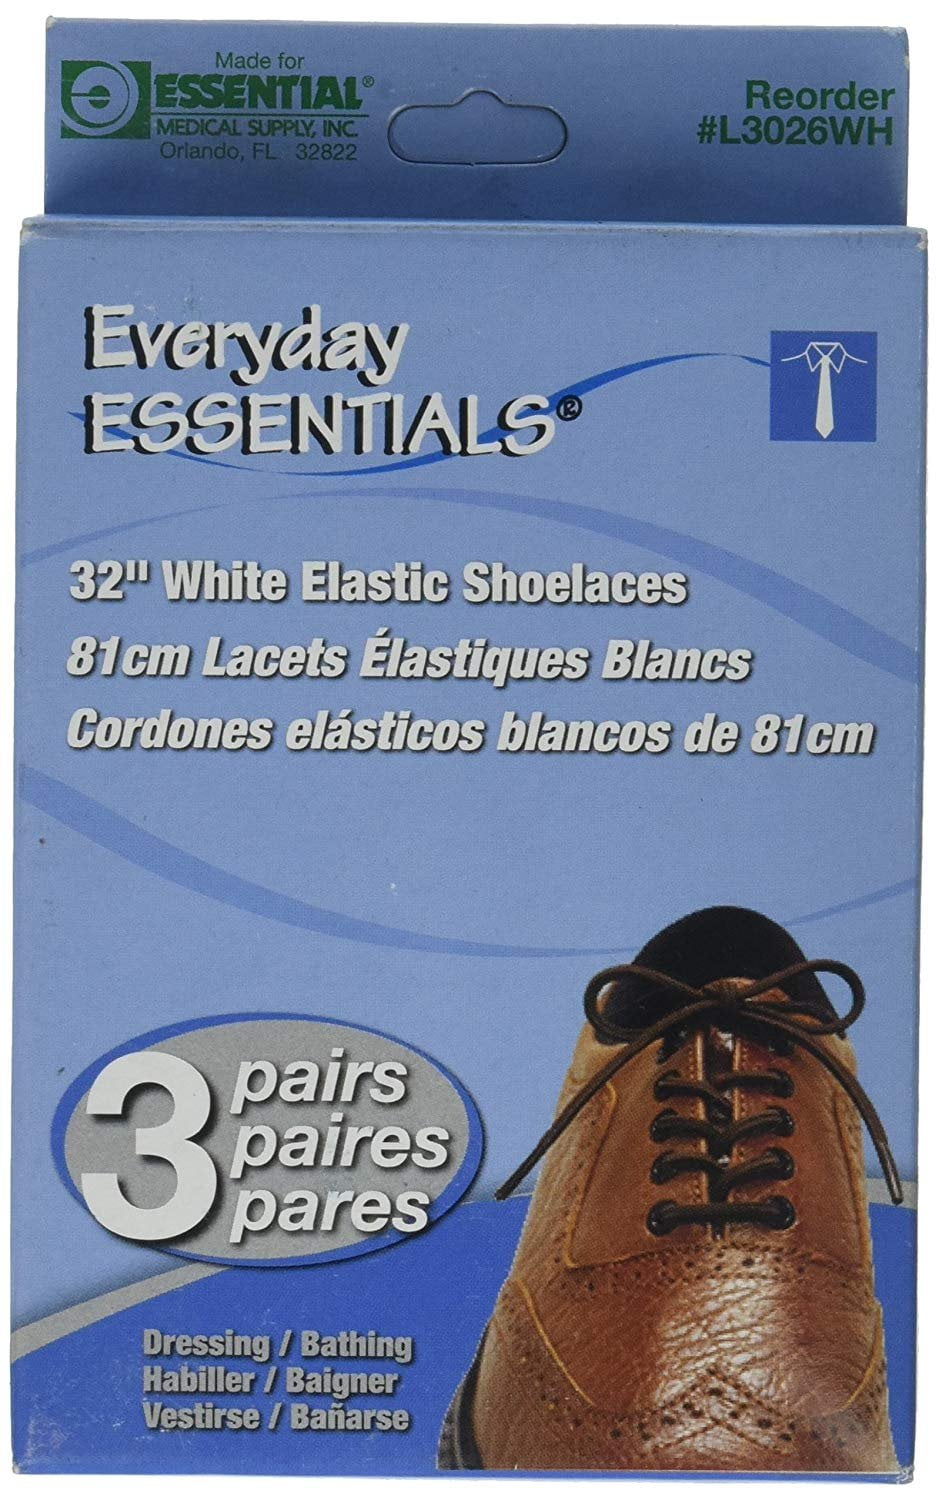 Essential Medical Supply Tie Once Elastic Shoelace 3 Pairs in 1 Pack White 24'' 